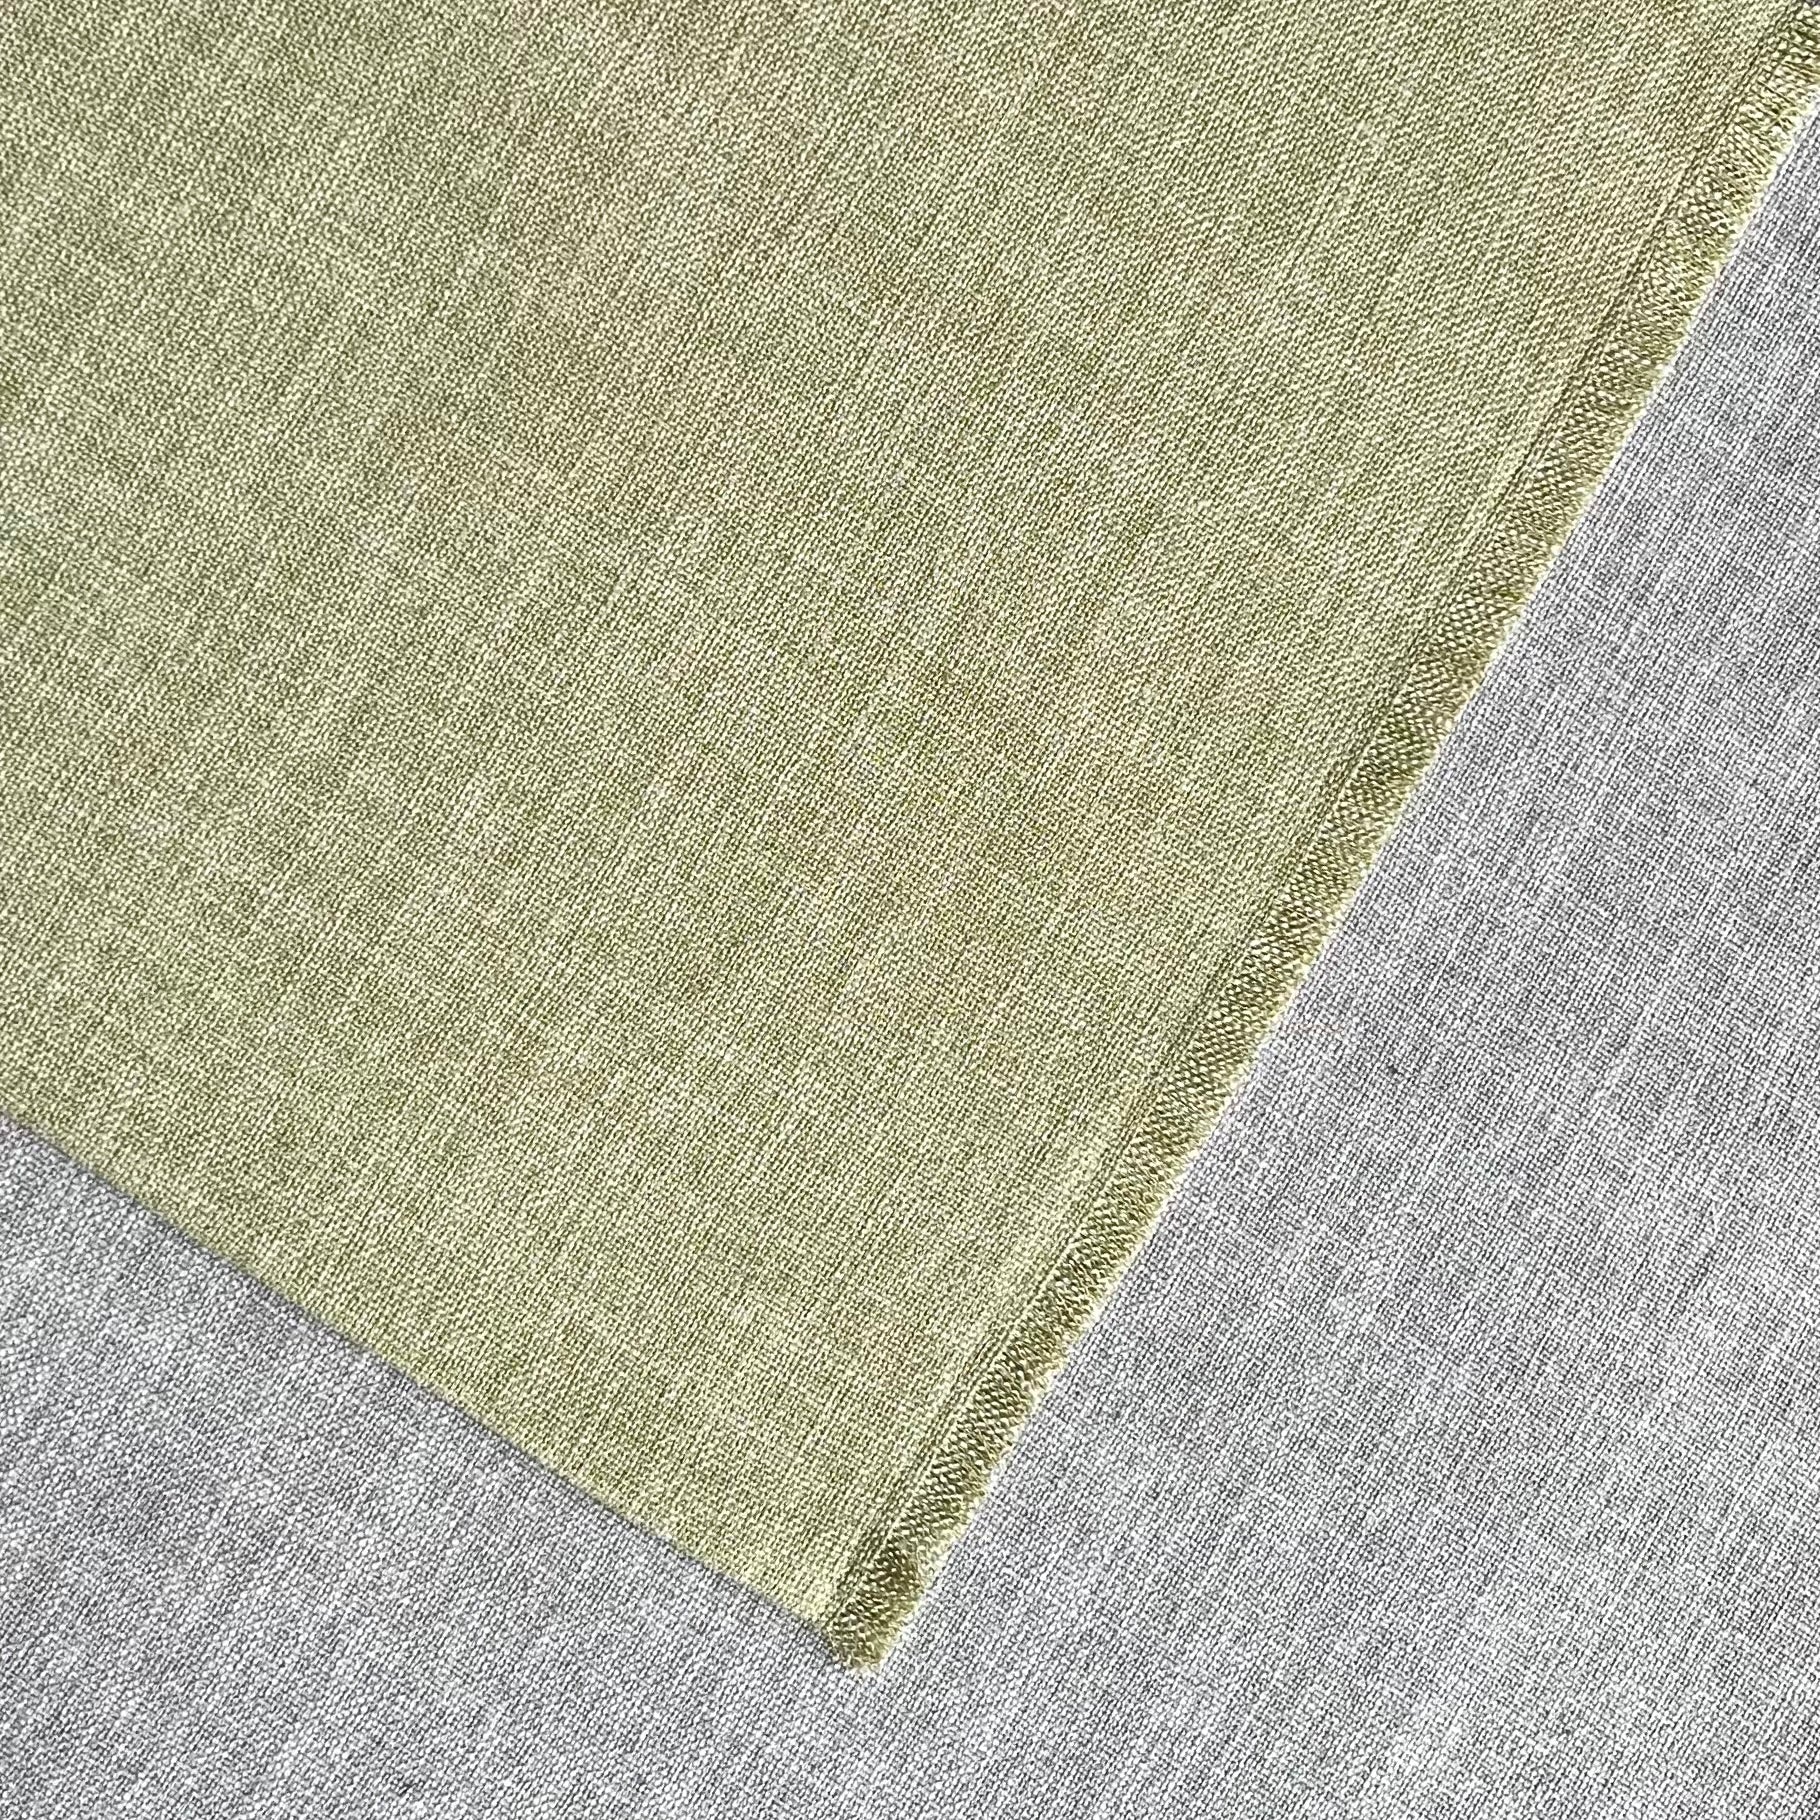 Nomad Heathered Placemat - Willow